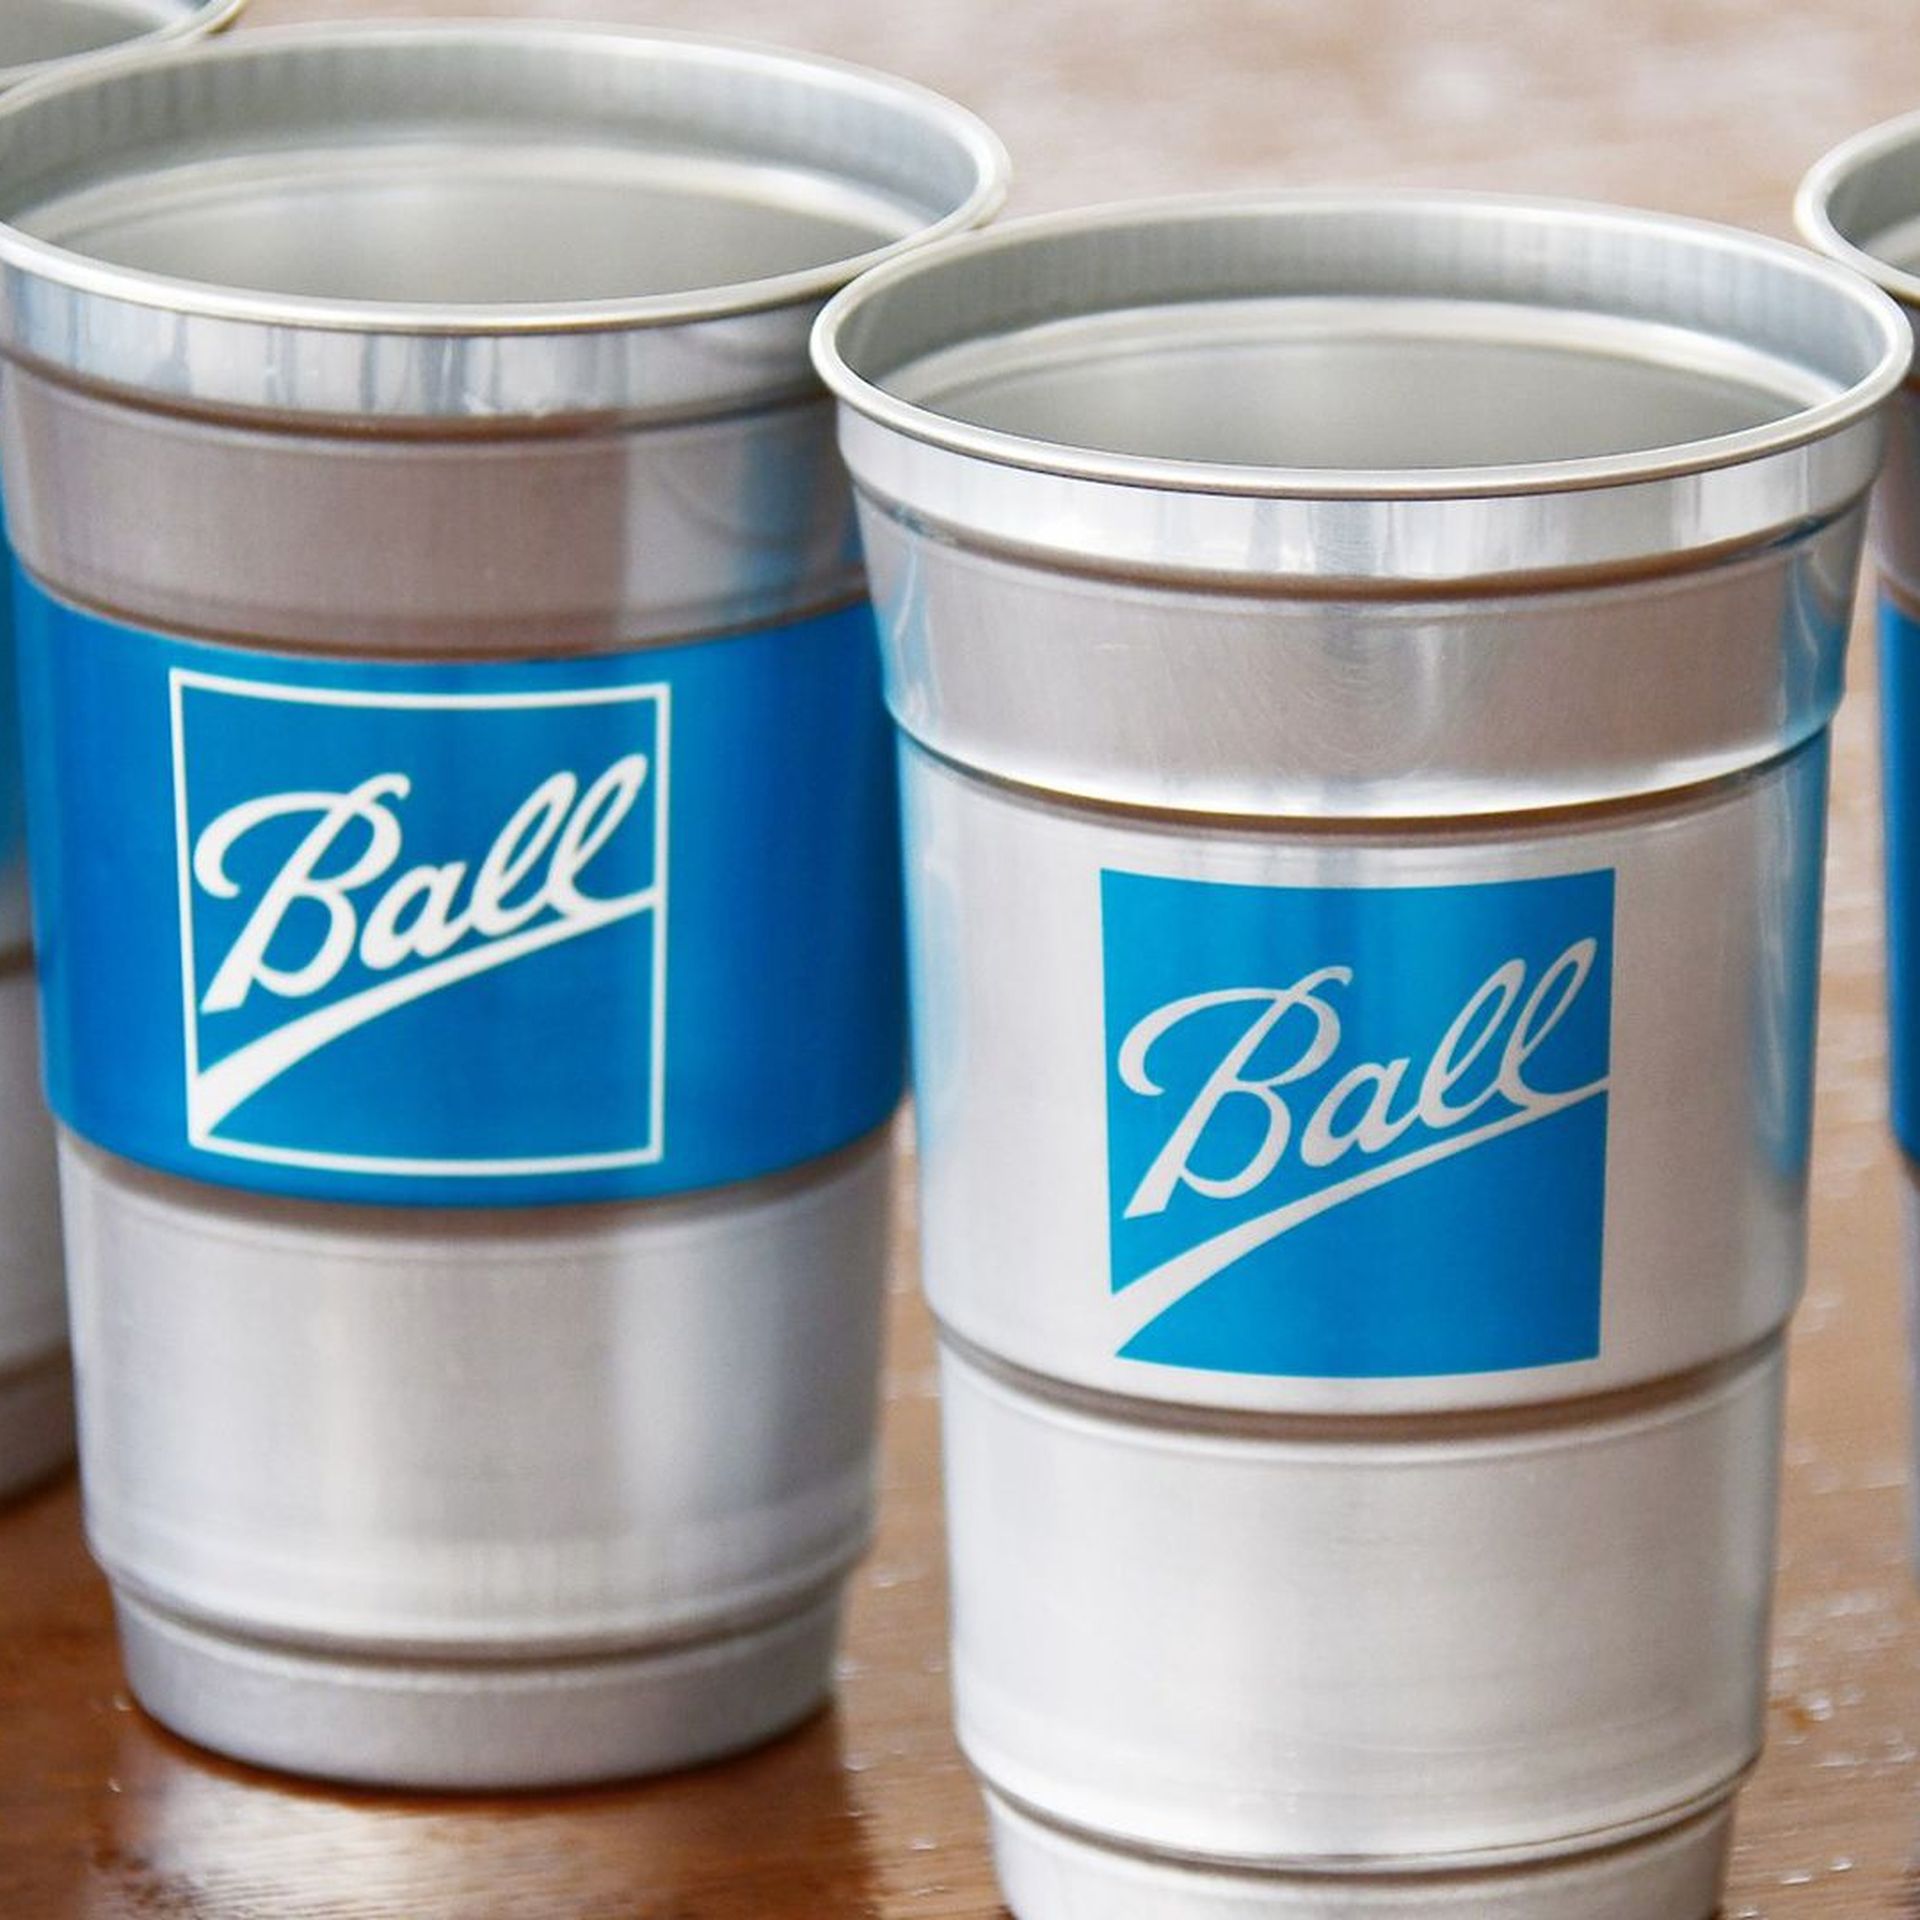 BALL CORPORATION PARTNERS WITH TAILGREETER TO OFFER THE INFINITELY  RECYCLABLE BALL ALUMINUM CUP® FOR TAILGATING